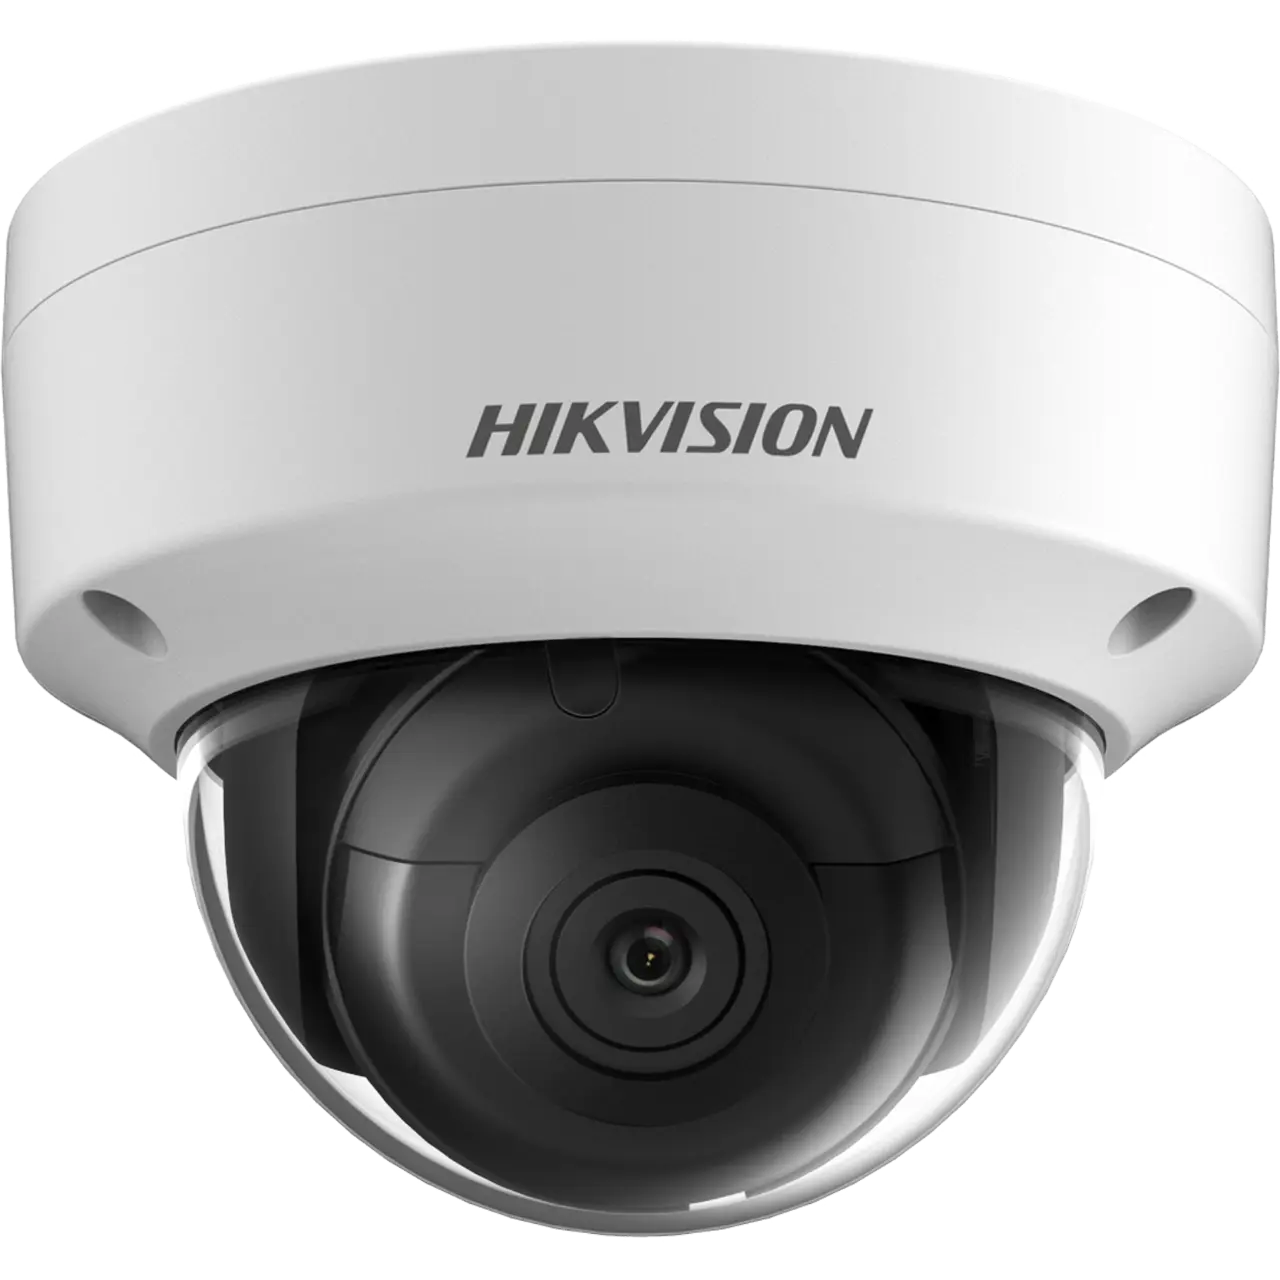 HIKVISION 2 MP WDR FIXED DOME NETWORK CAMERA (DS-2CD2121G0-I 4MM)